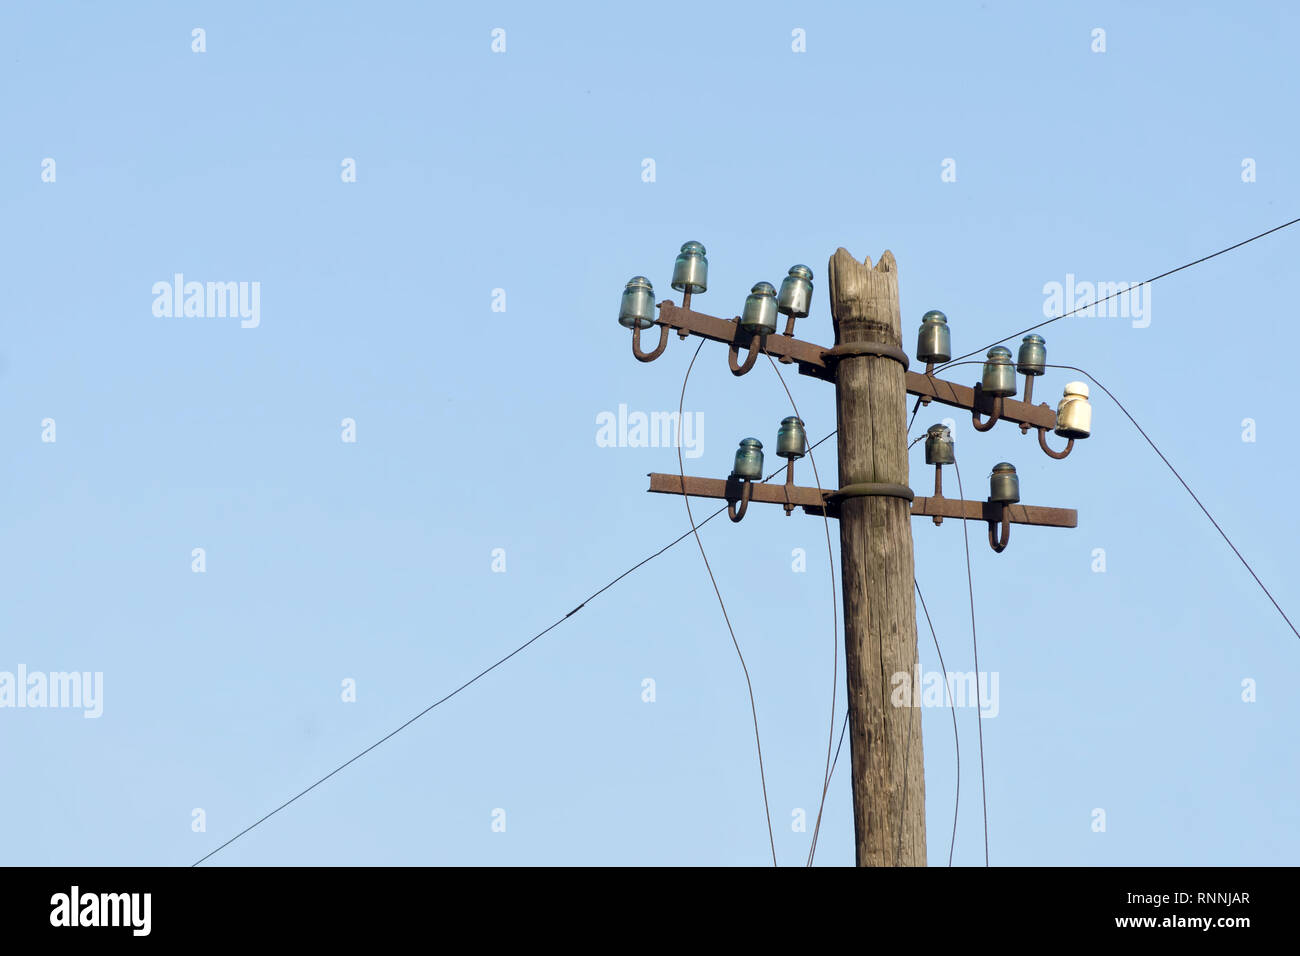 Old electric  wooden pole with glass and ceramic insulators and electric wires against blue sky. Copy space. Stock Photo